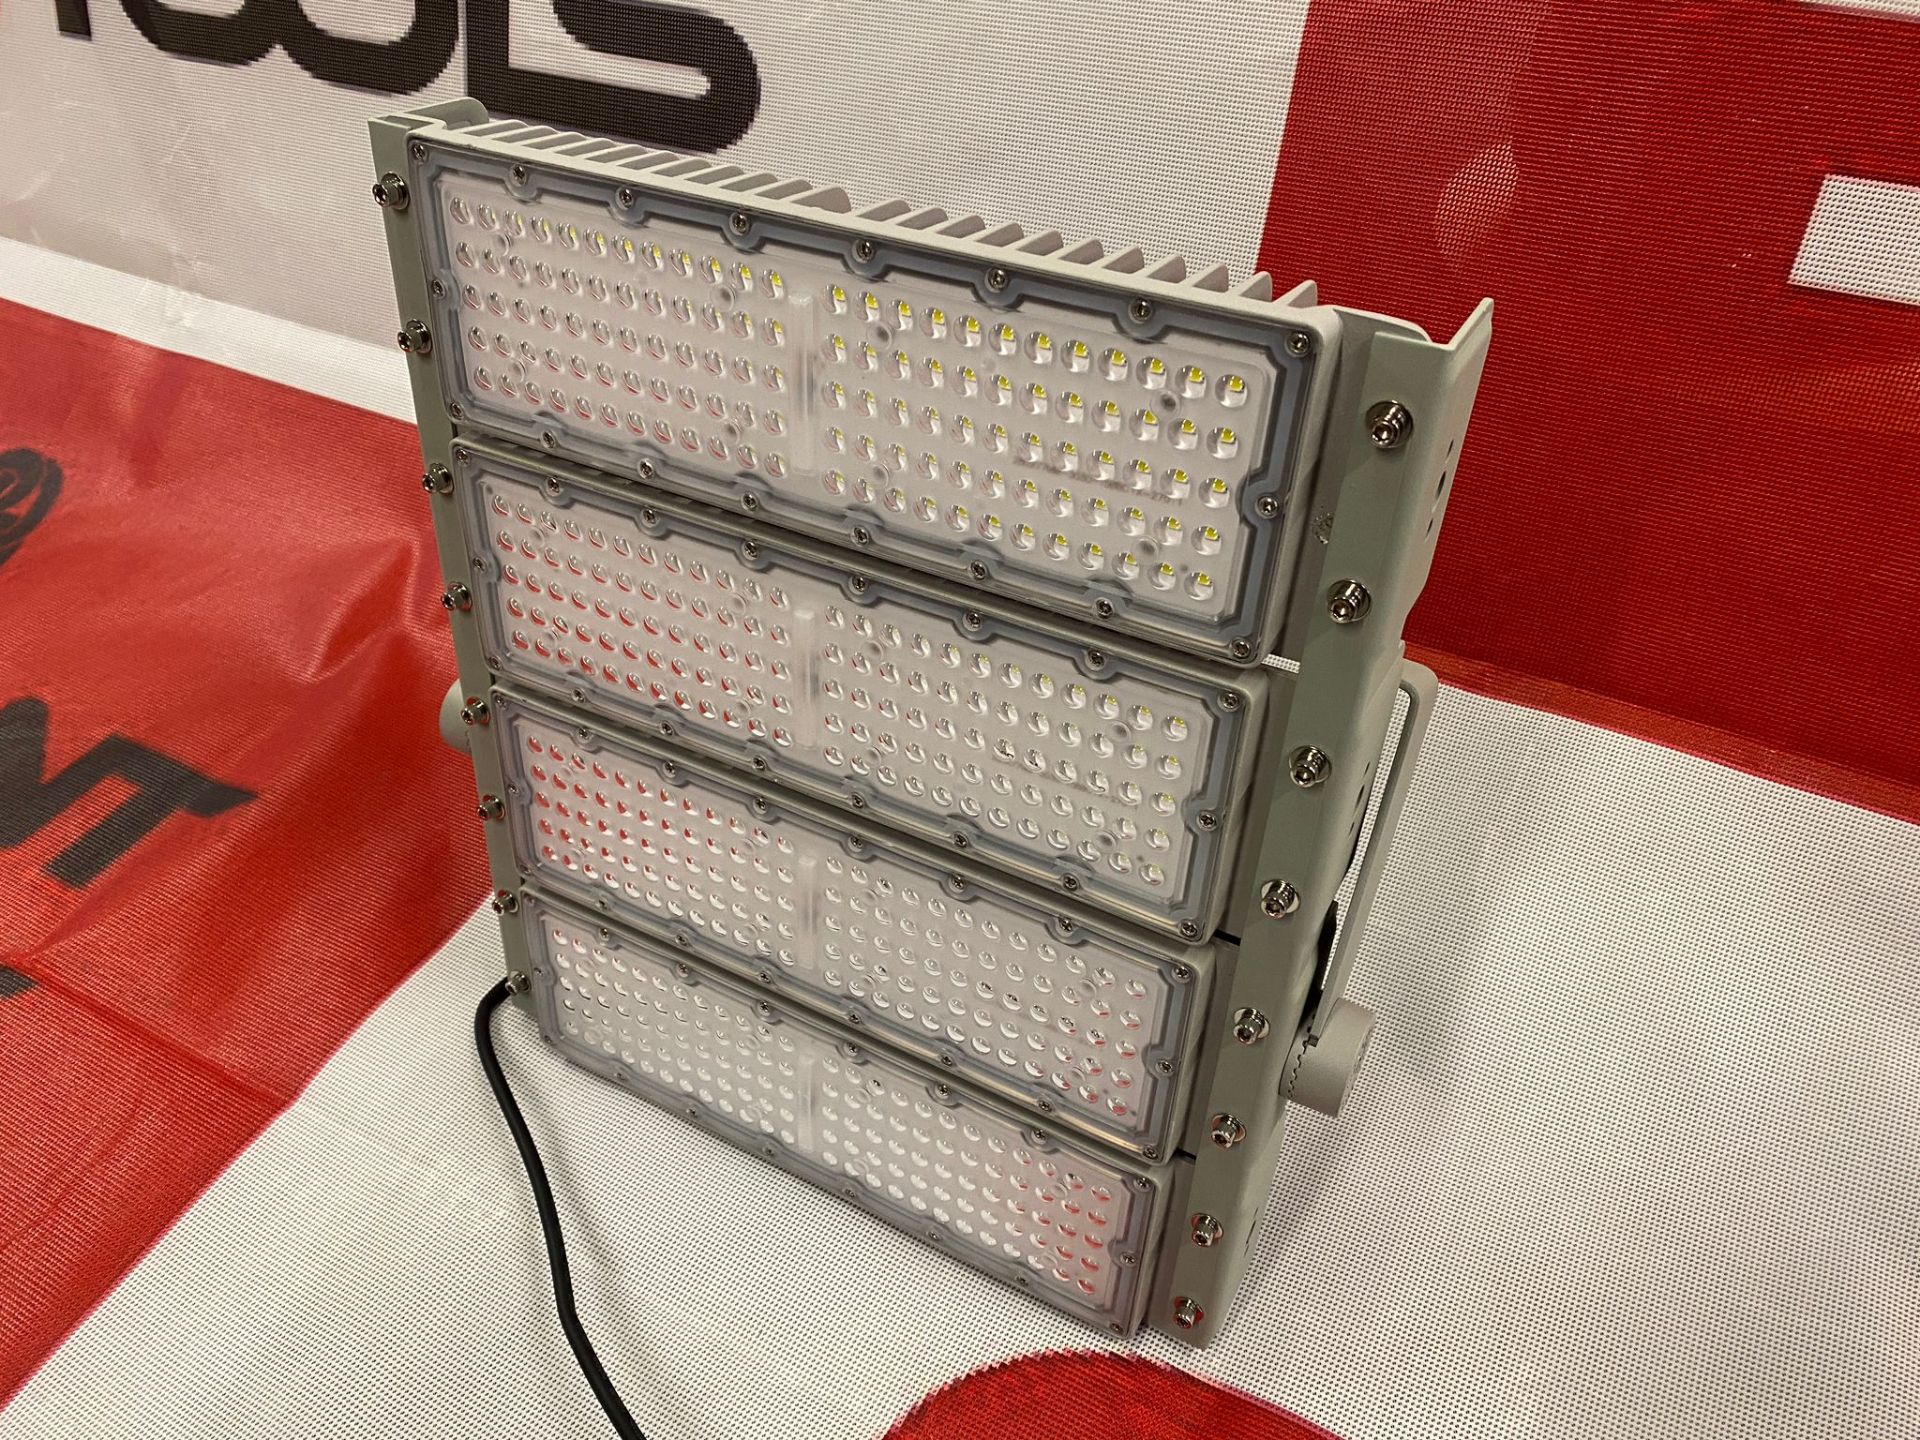 3 x LED400 Watt Flood Light Panel - For Car Parks, Security, Playing fields, Football pitches etc - Image 2 of 8